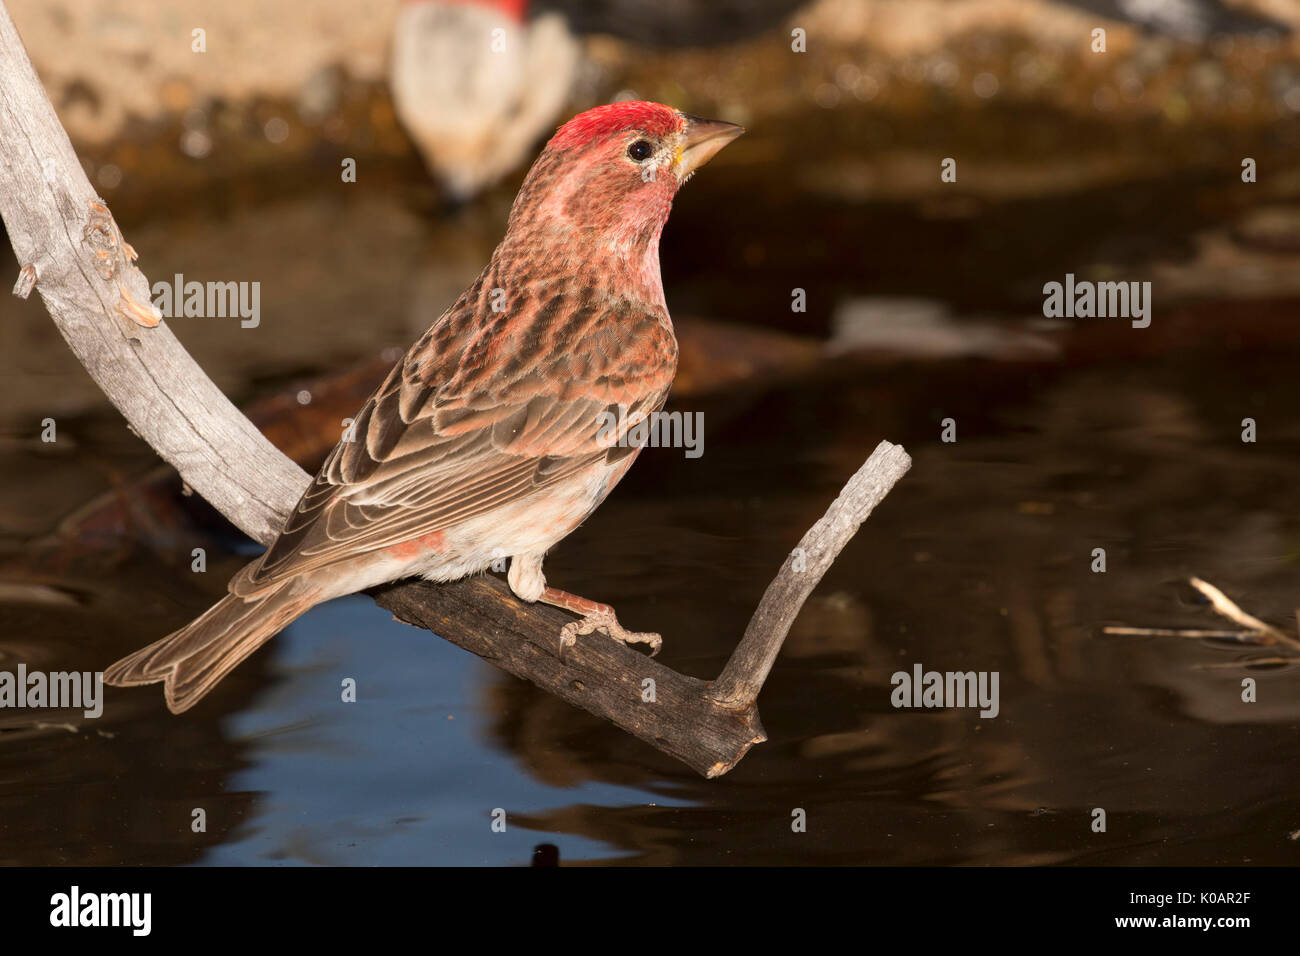 Cassin's finch (Haemorhous cassinii) at Cabin Lake bird blind, Deschutes National Forest, Oregon Stock Photo